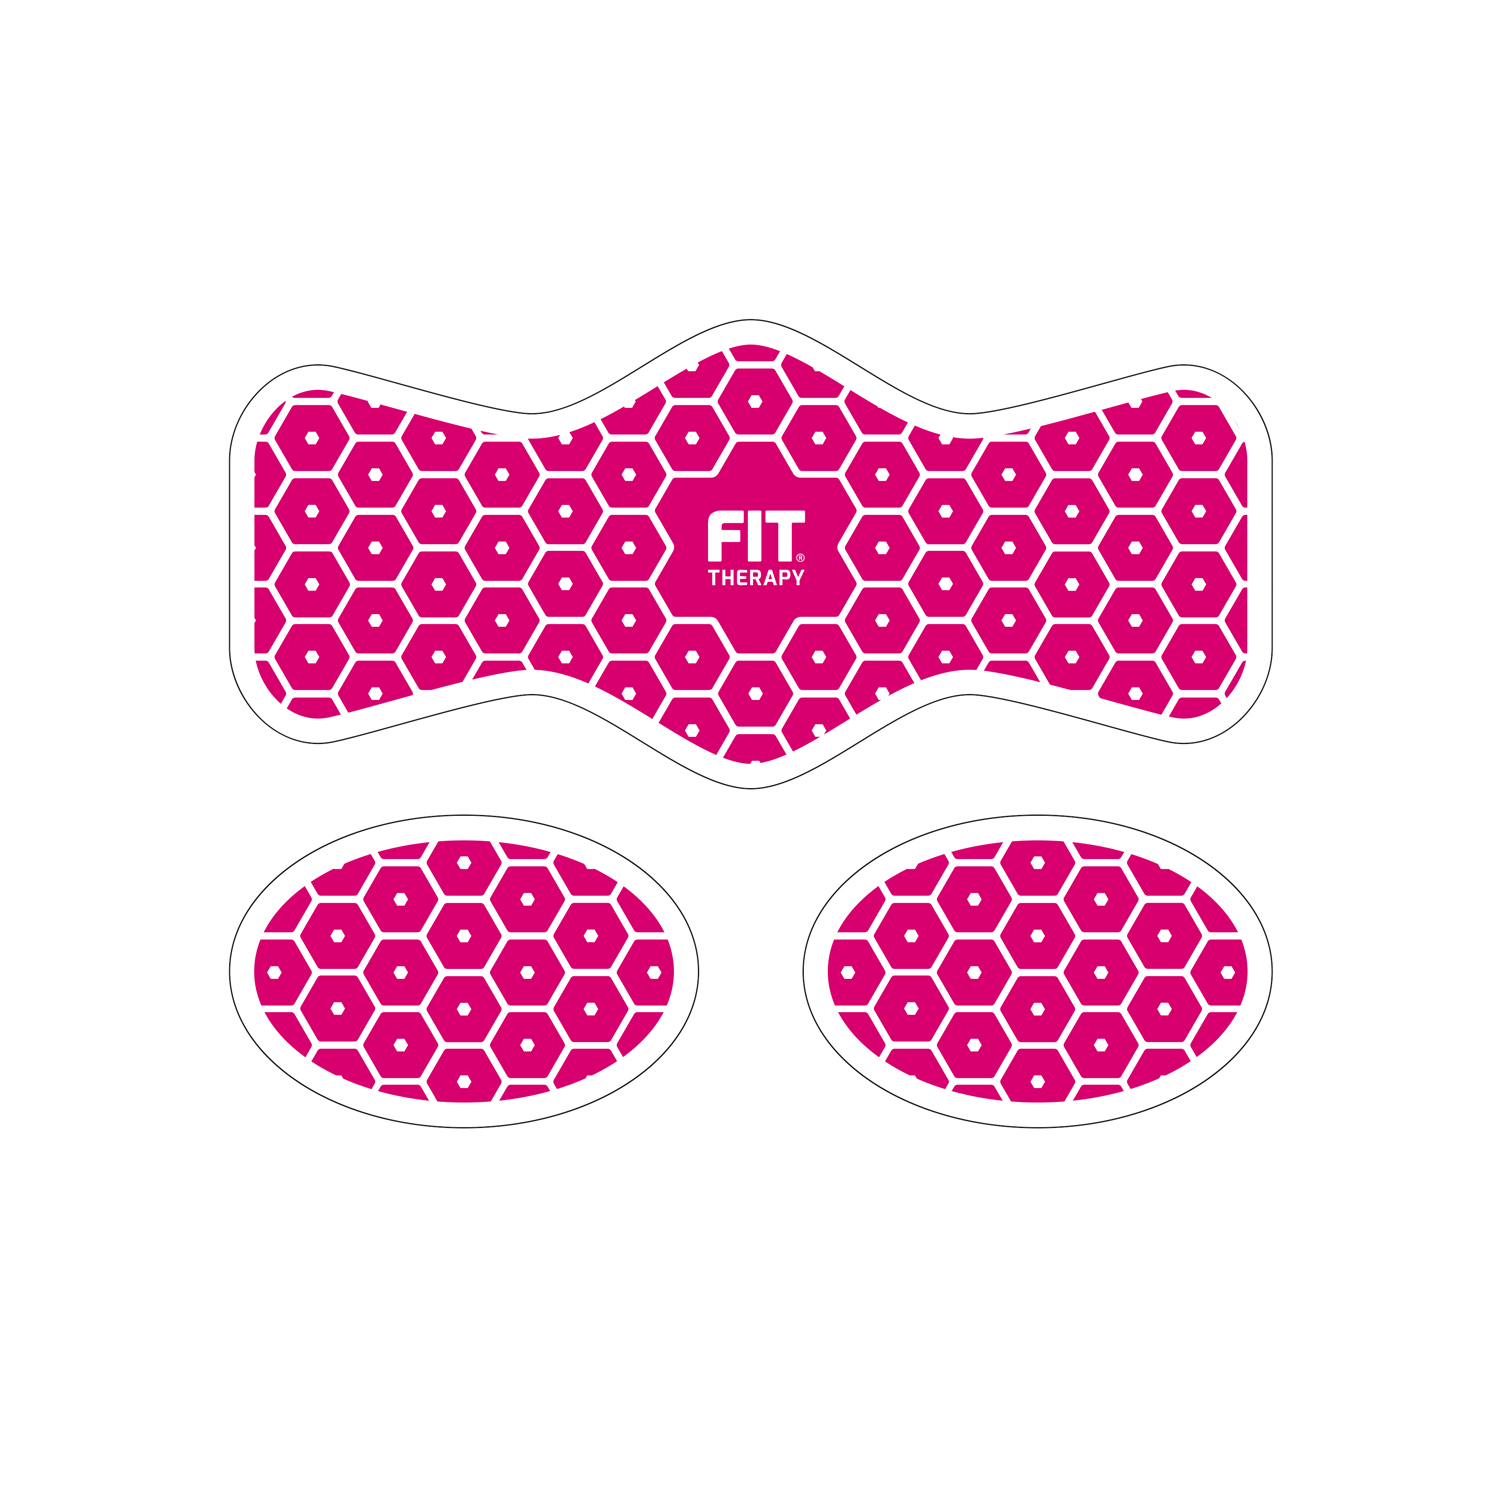 LADY - FIT THERAPY PATCH